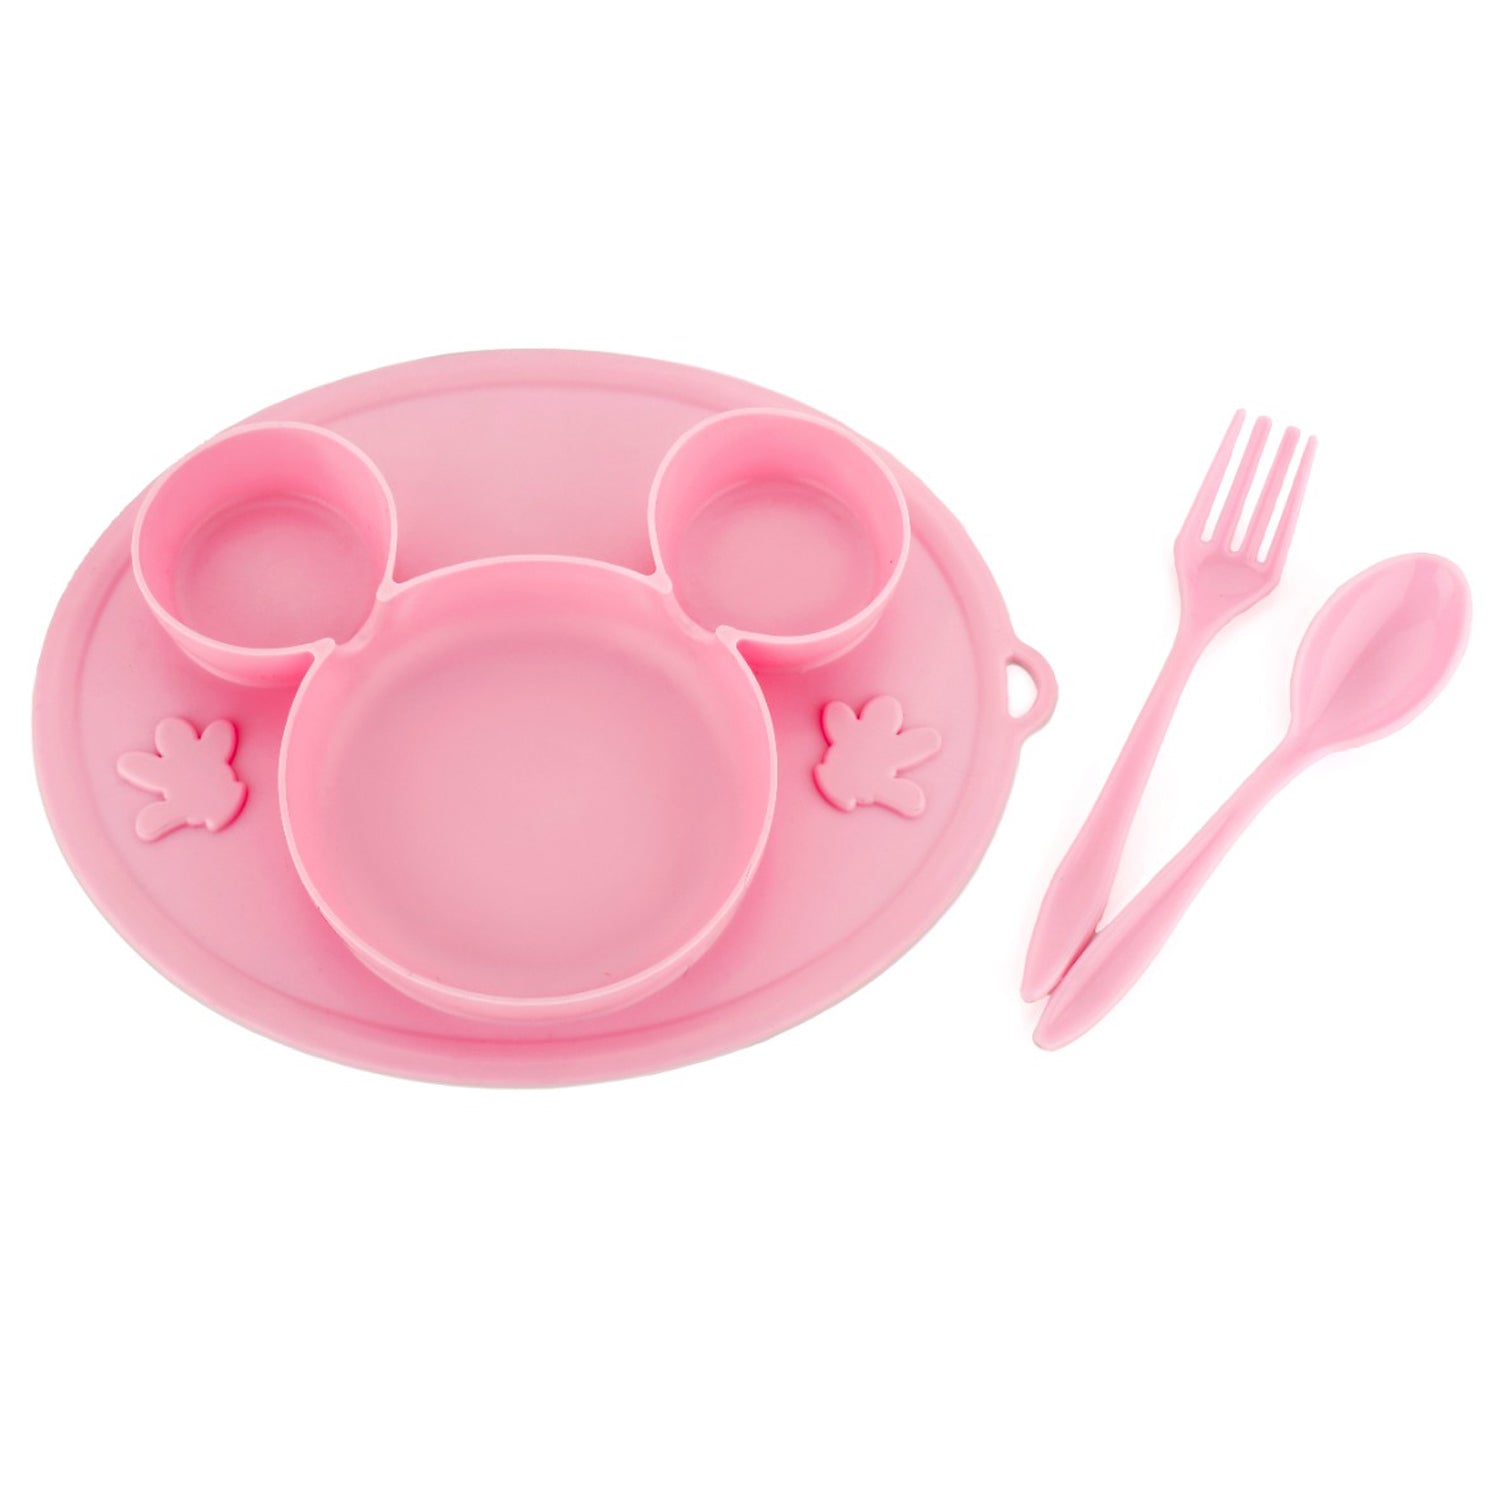 5210 Silicon Micky Plate And1 Spoon & 1 Fork For Kids 